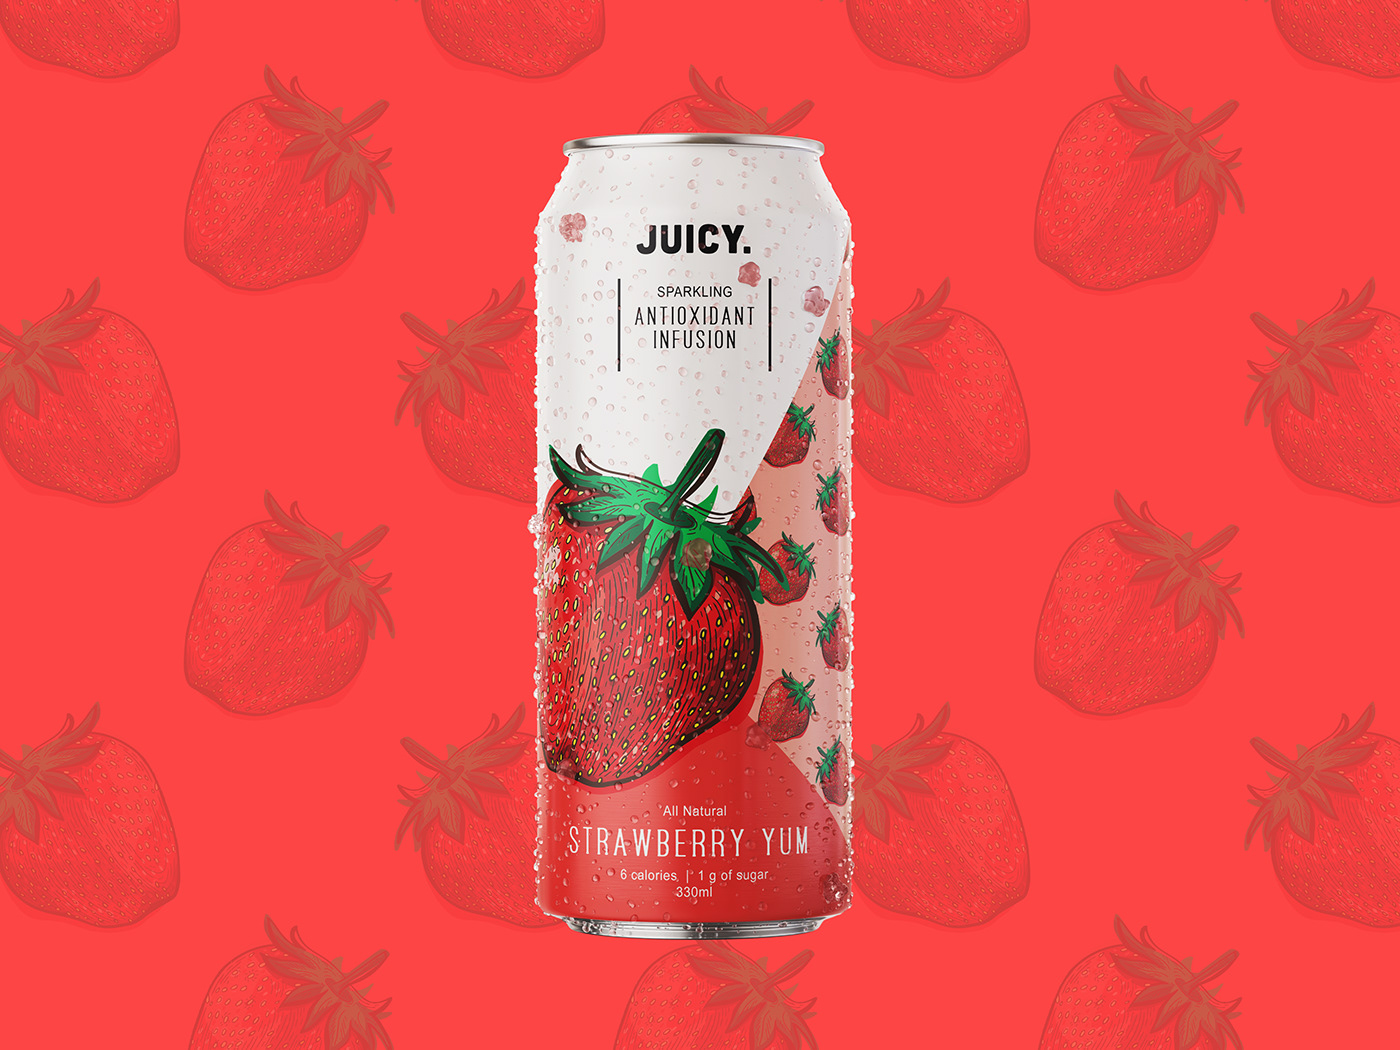 Refreshing summer drink with strawberry flavor. Packaging design with illustration and pattern. 